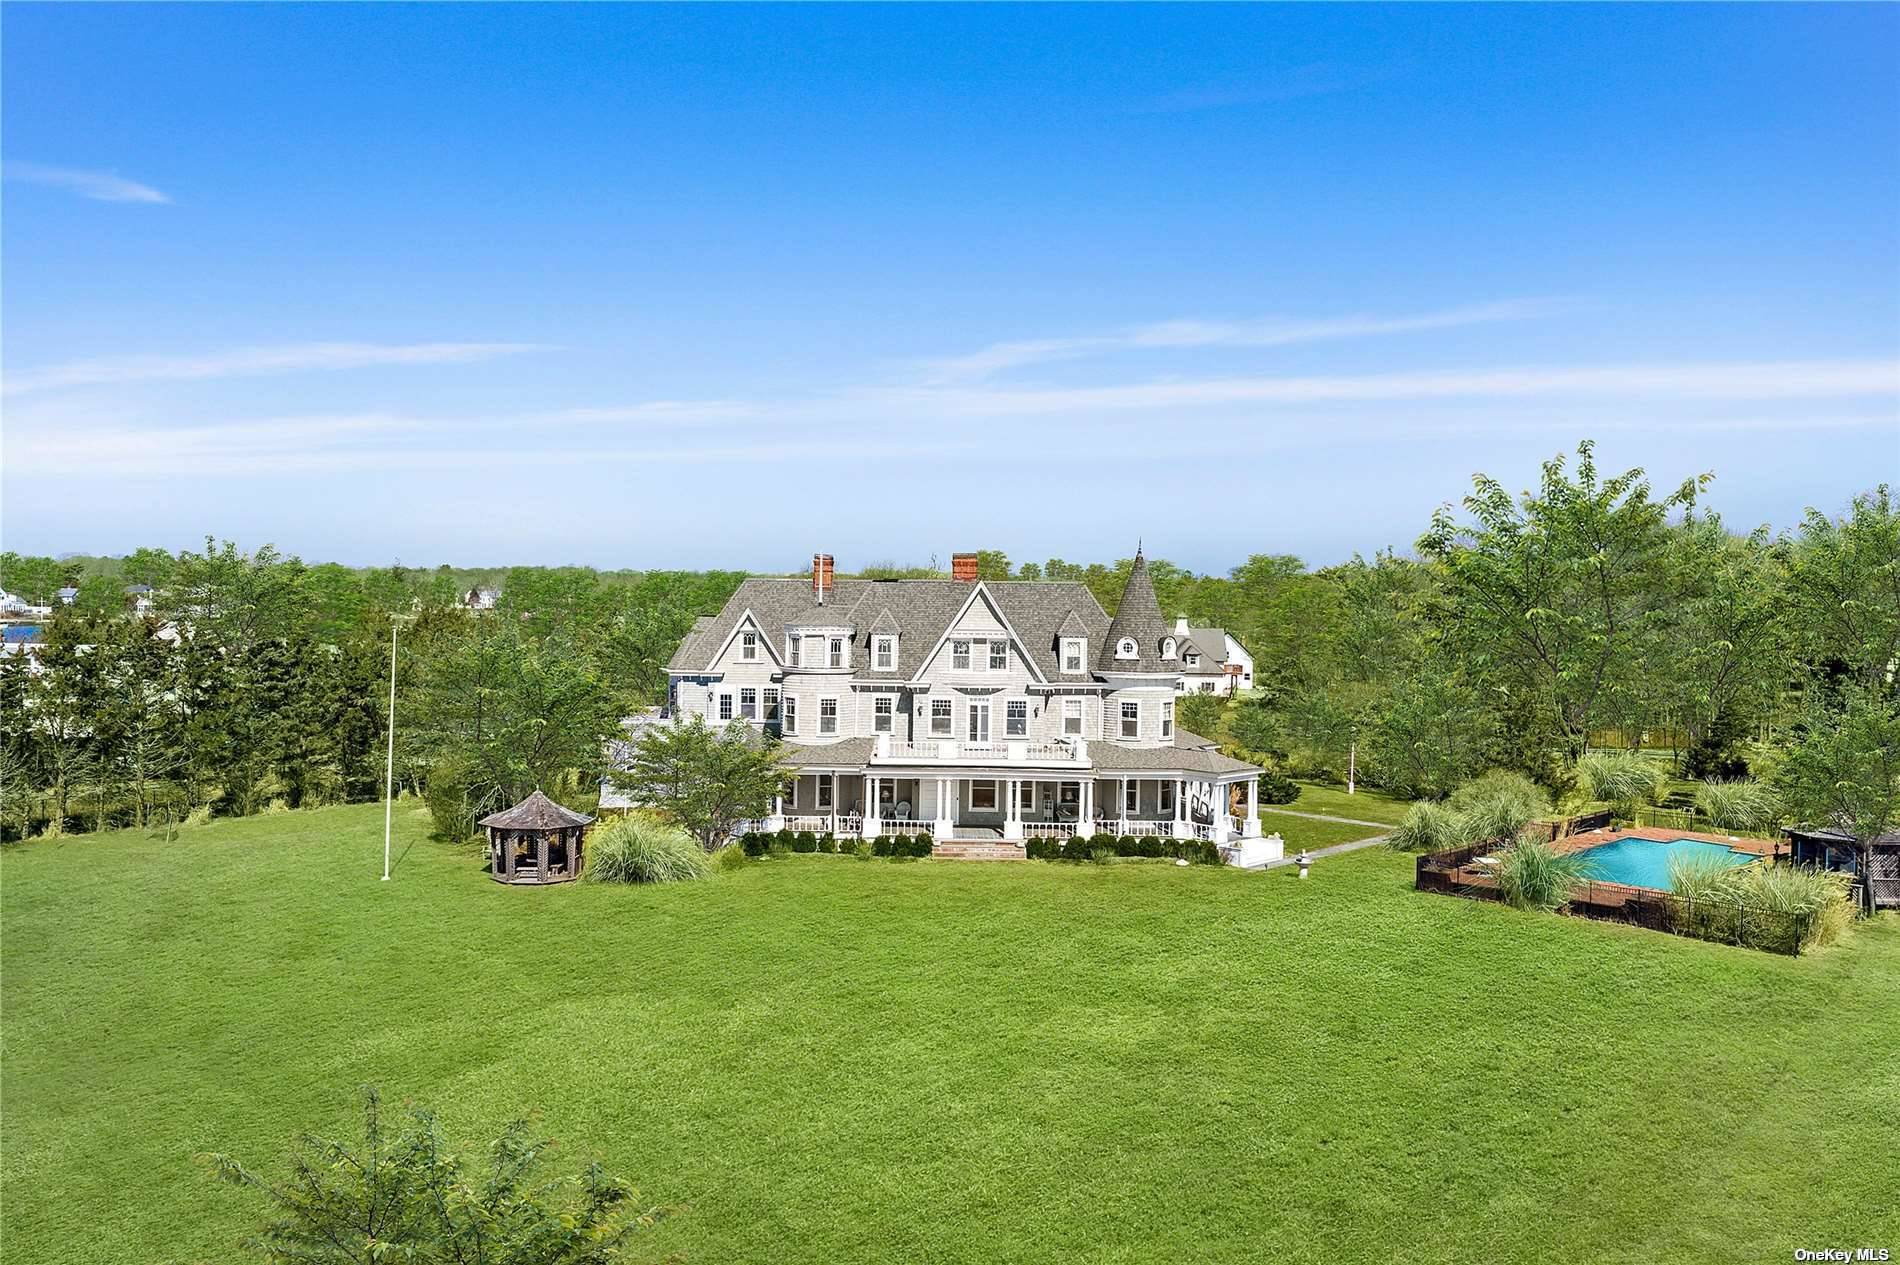 Pristine, original, and positioned on 3 acres of rolling waterfront, this majestic, three story, 9000 sqft Victorian, built in 1896 as a convent, is nothing short of divine.